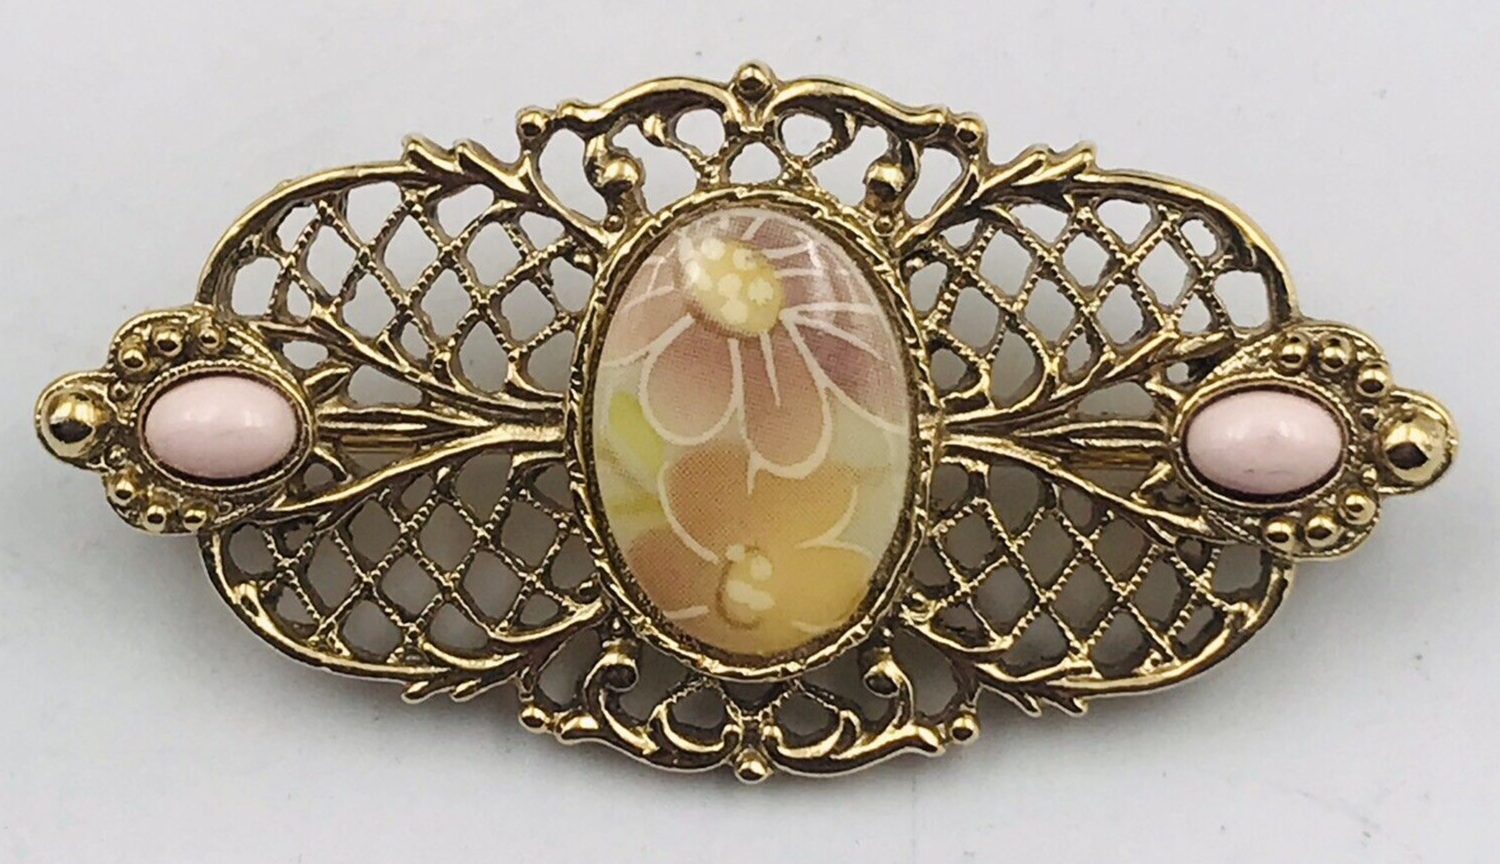 Primary image for Vintage Gold Tone Filigree Style Ceramic Floral Cameo Brooch Pin 2.25" x 1.25"